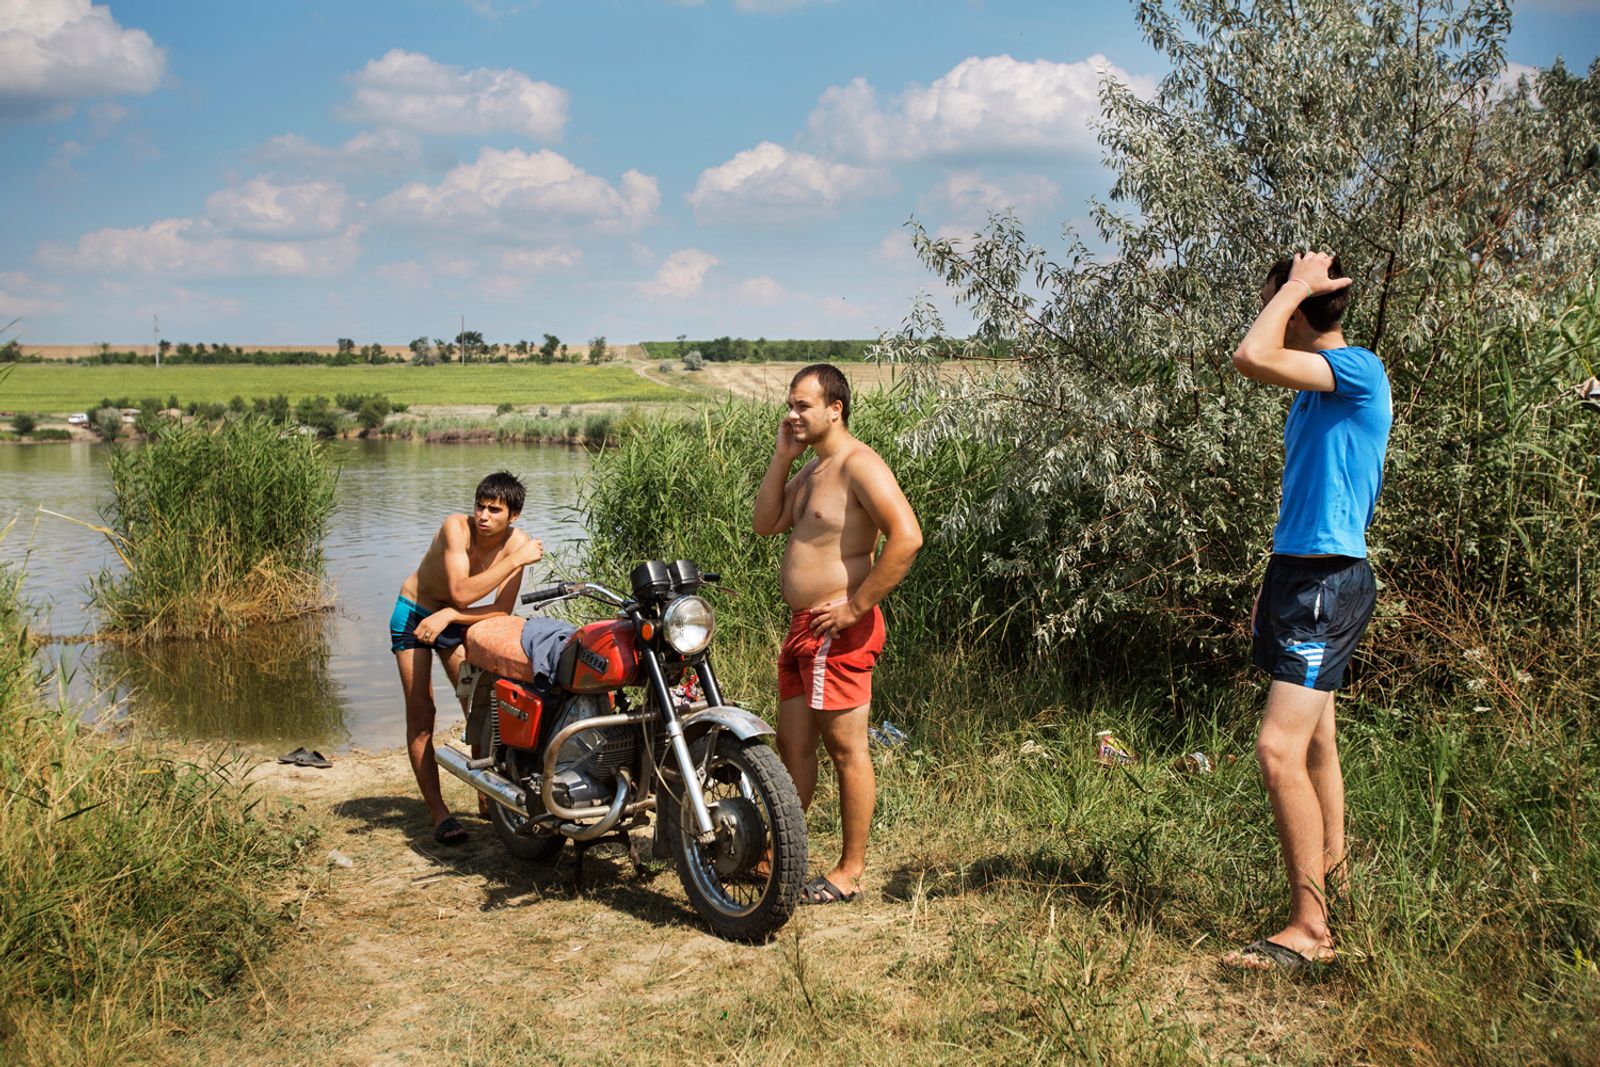 © Alessandro Vincenzi - Moldova. Beshalma, Gagauzia - July 2017Three men after a bath in the lake wait to dry before leaving with their bike.